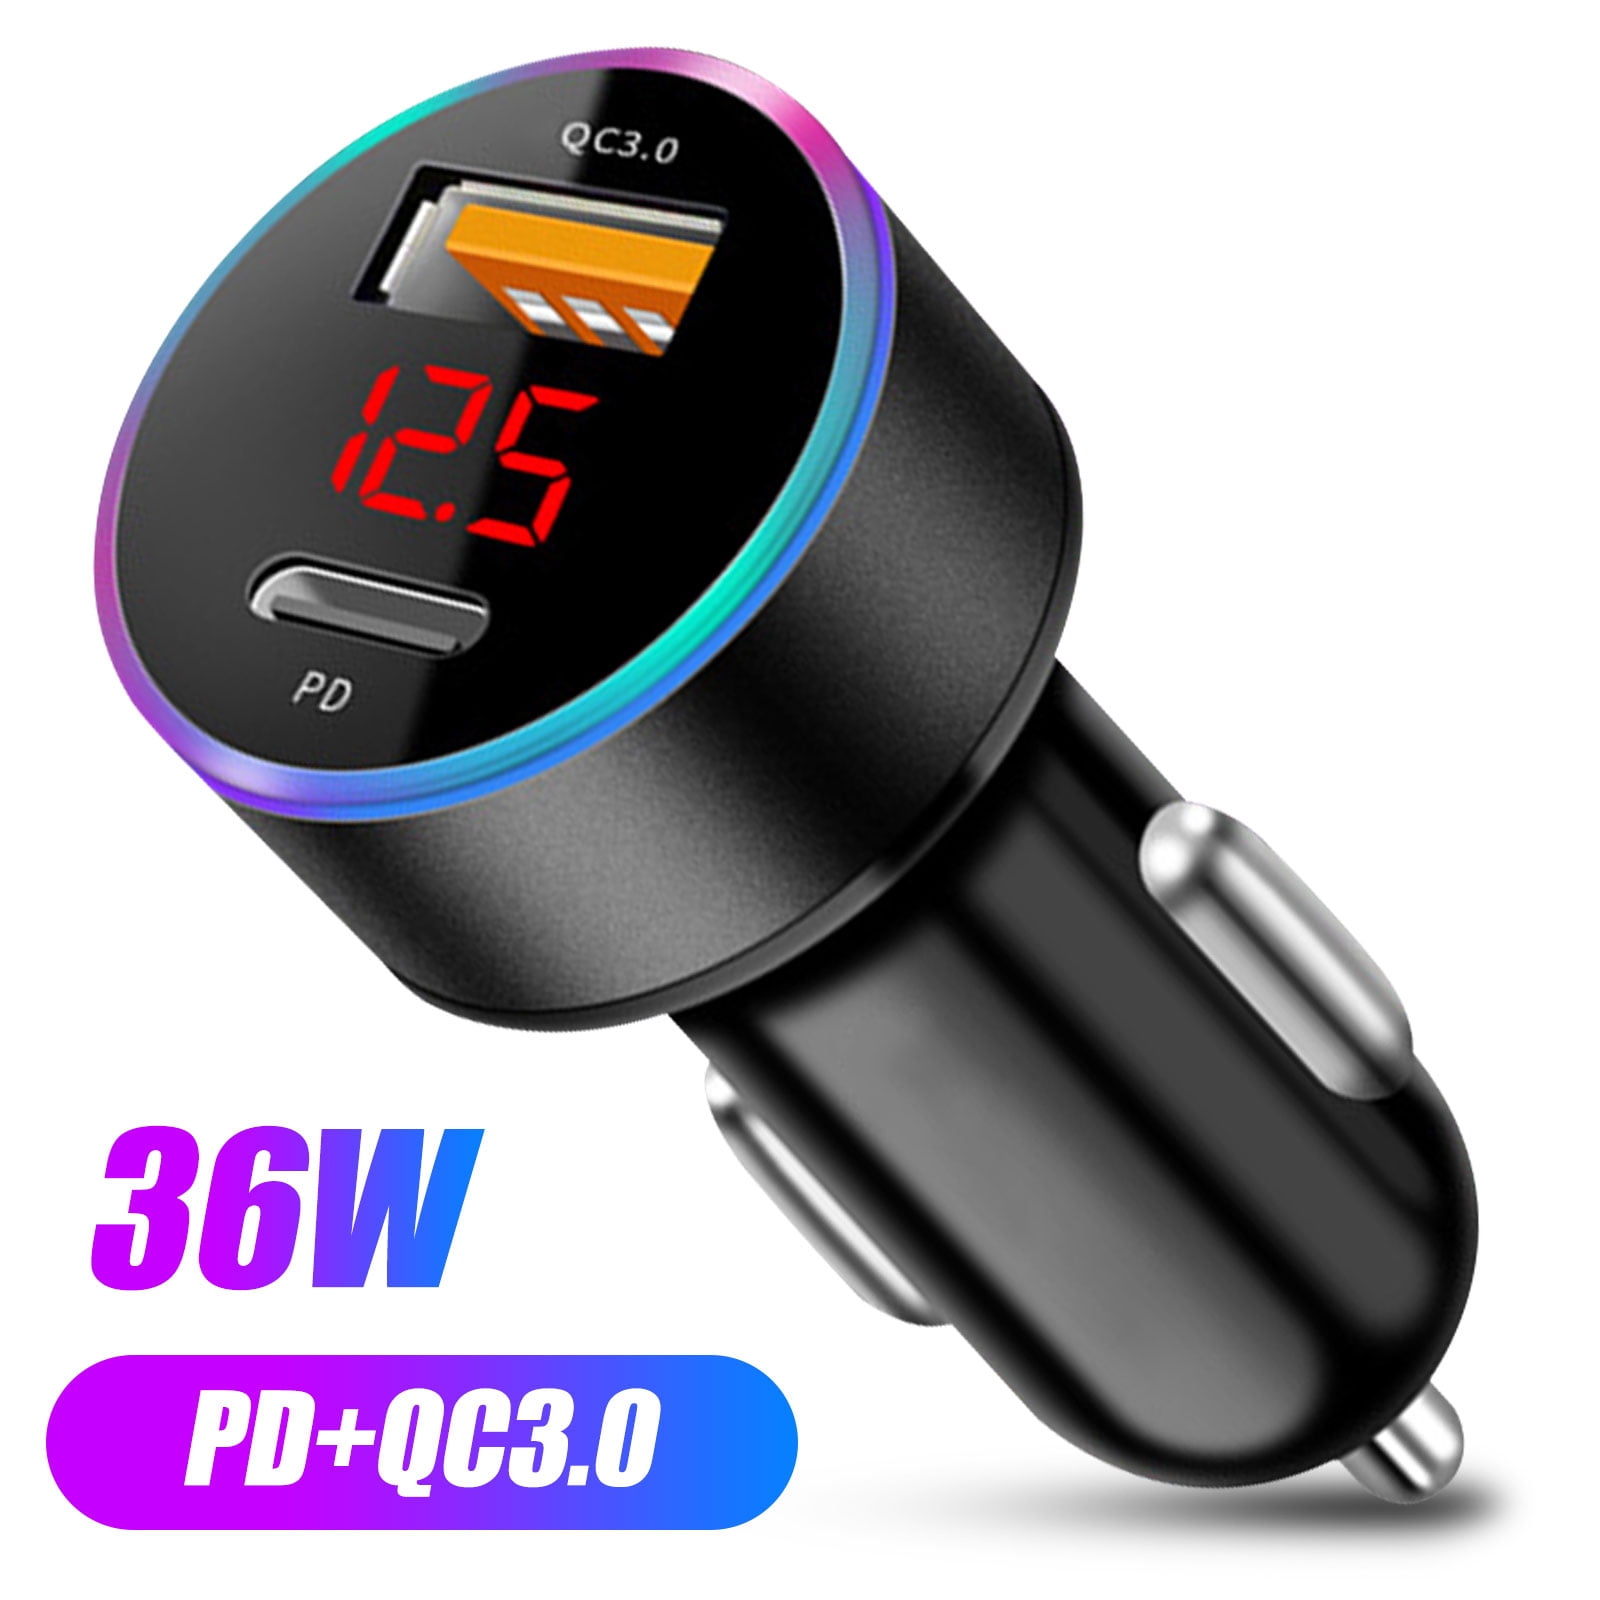 TSV USB C Car Charger, 36W Fast USB Car Charger PD QC 3.0 Dual Port Car  Adapter, Mini Alloy USB Charger Compatible with iPhone 12, 12 Mini, 12 Pro,  12 Pro Max,